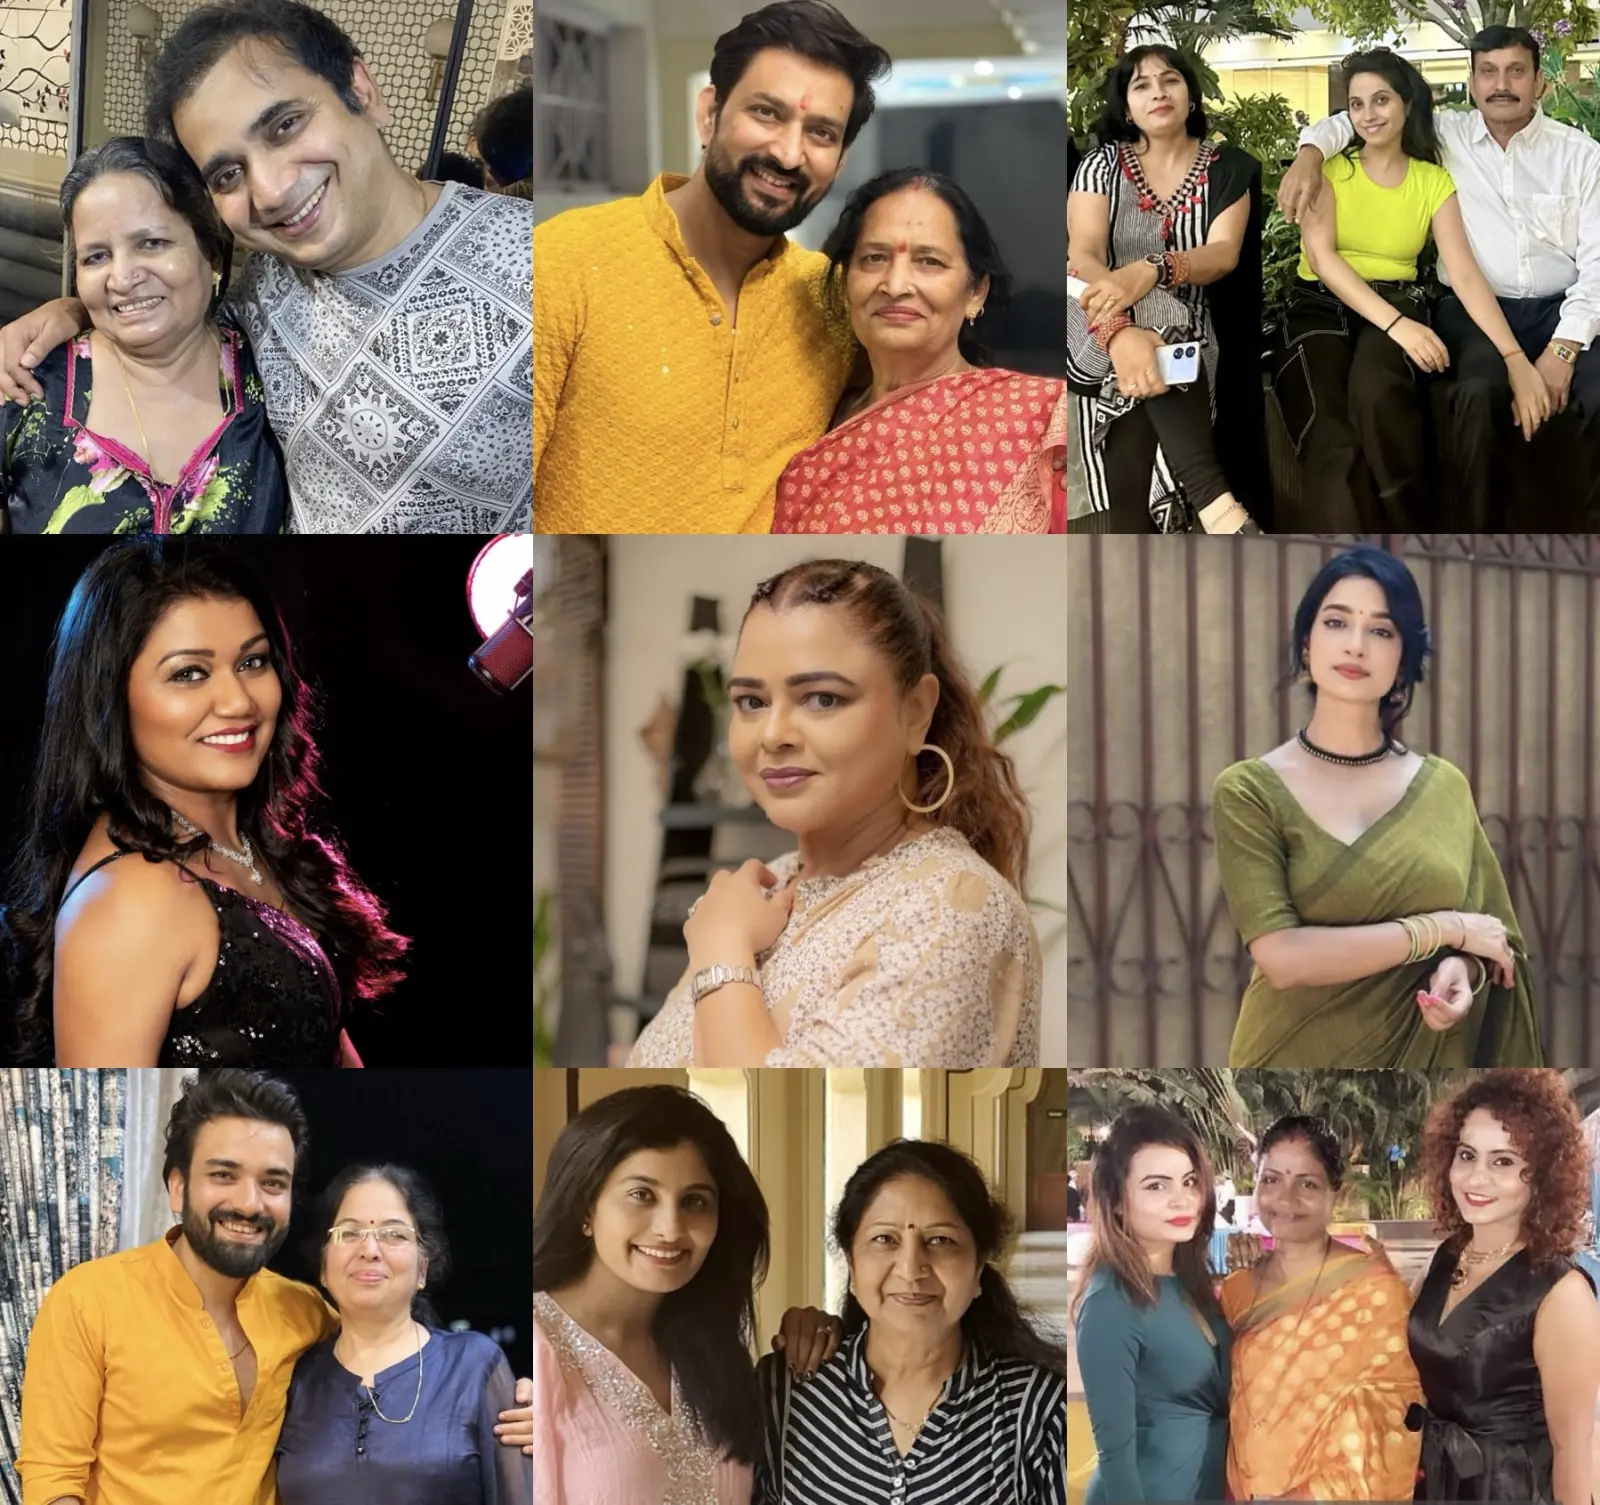 Gave wings to fly: Celebrities talk about their mothers on Mother’s Day